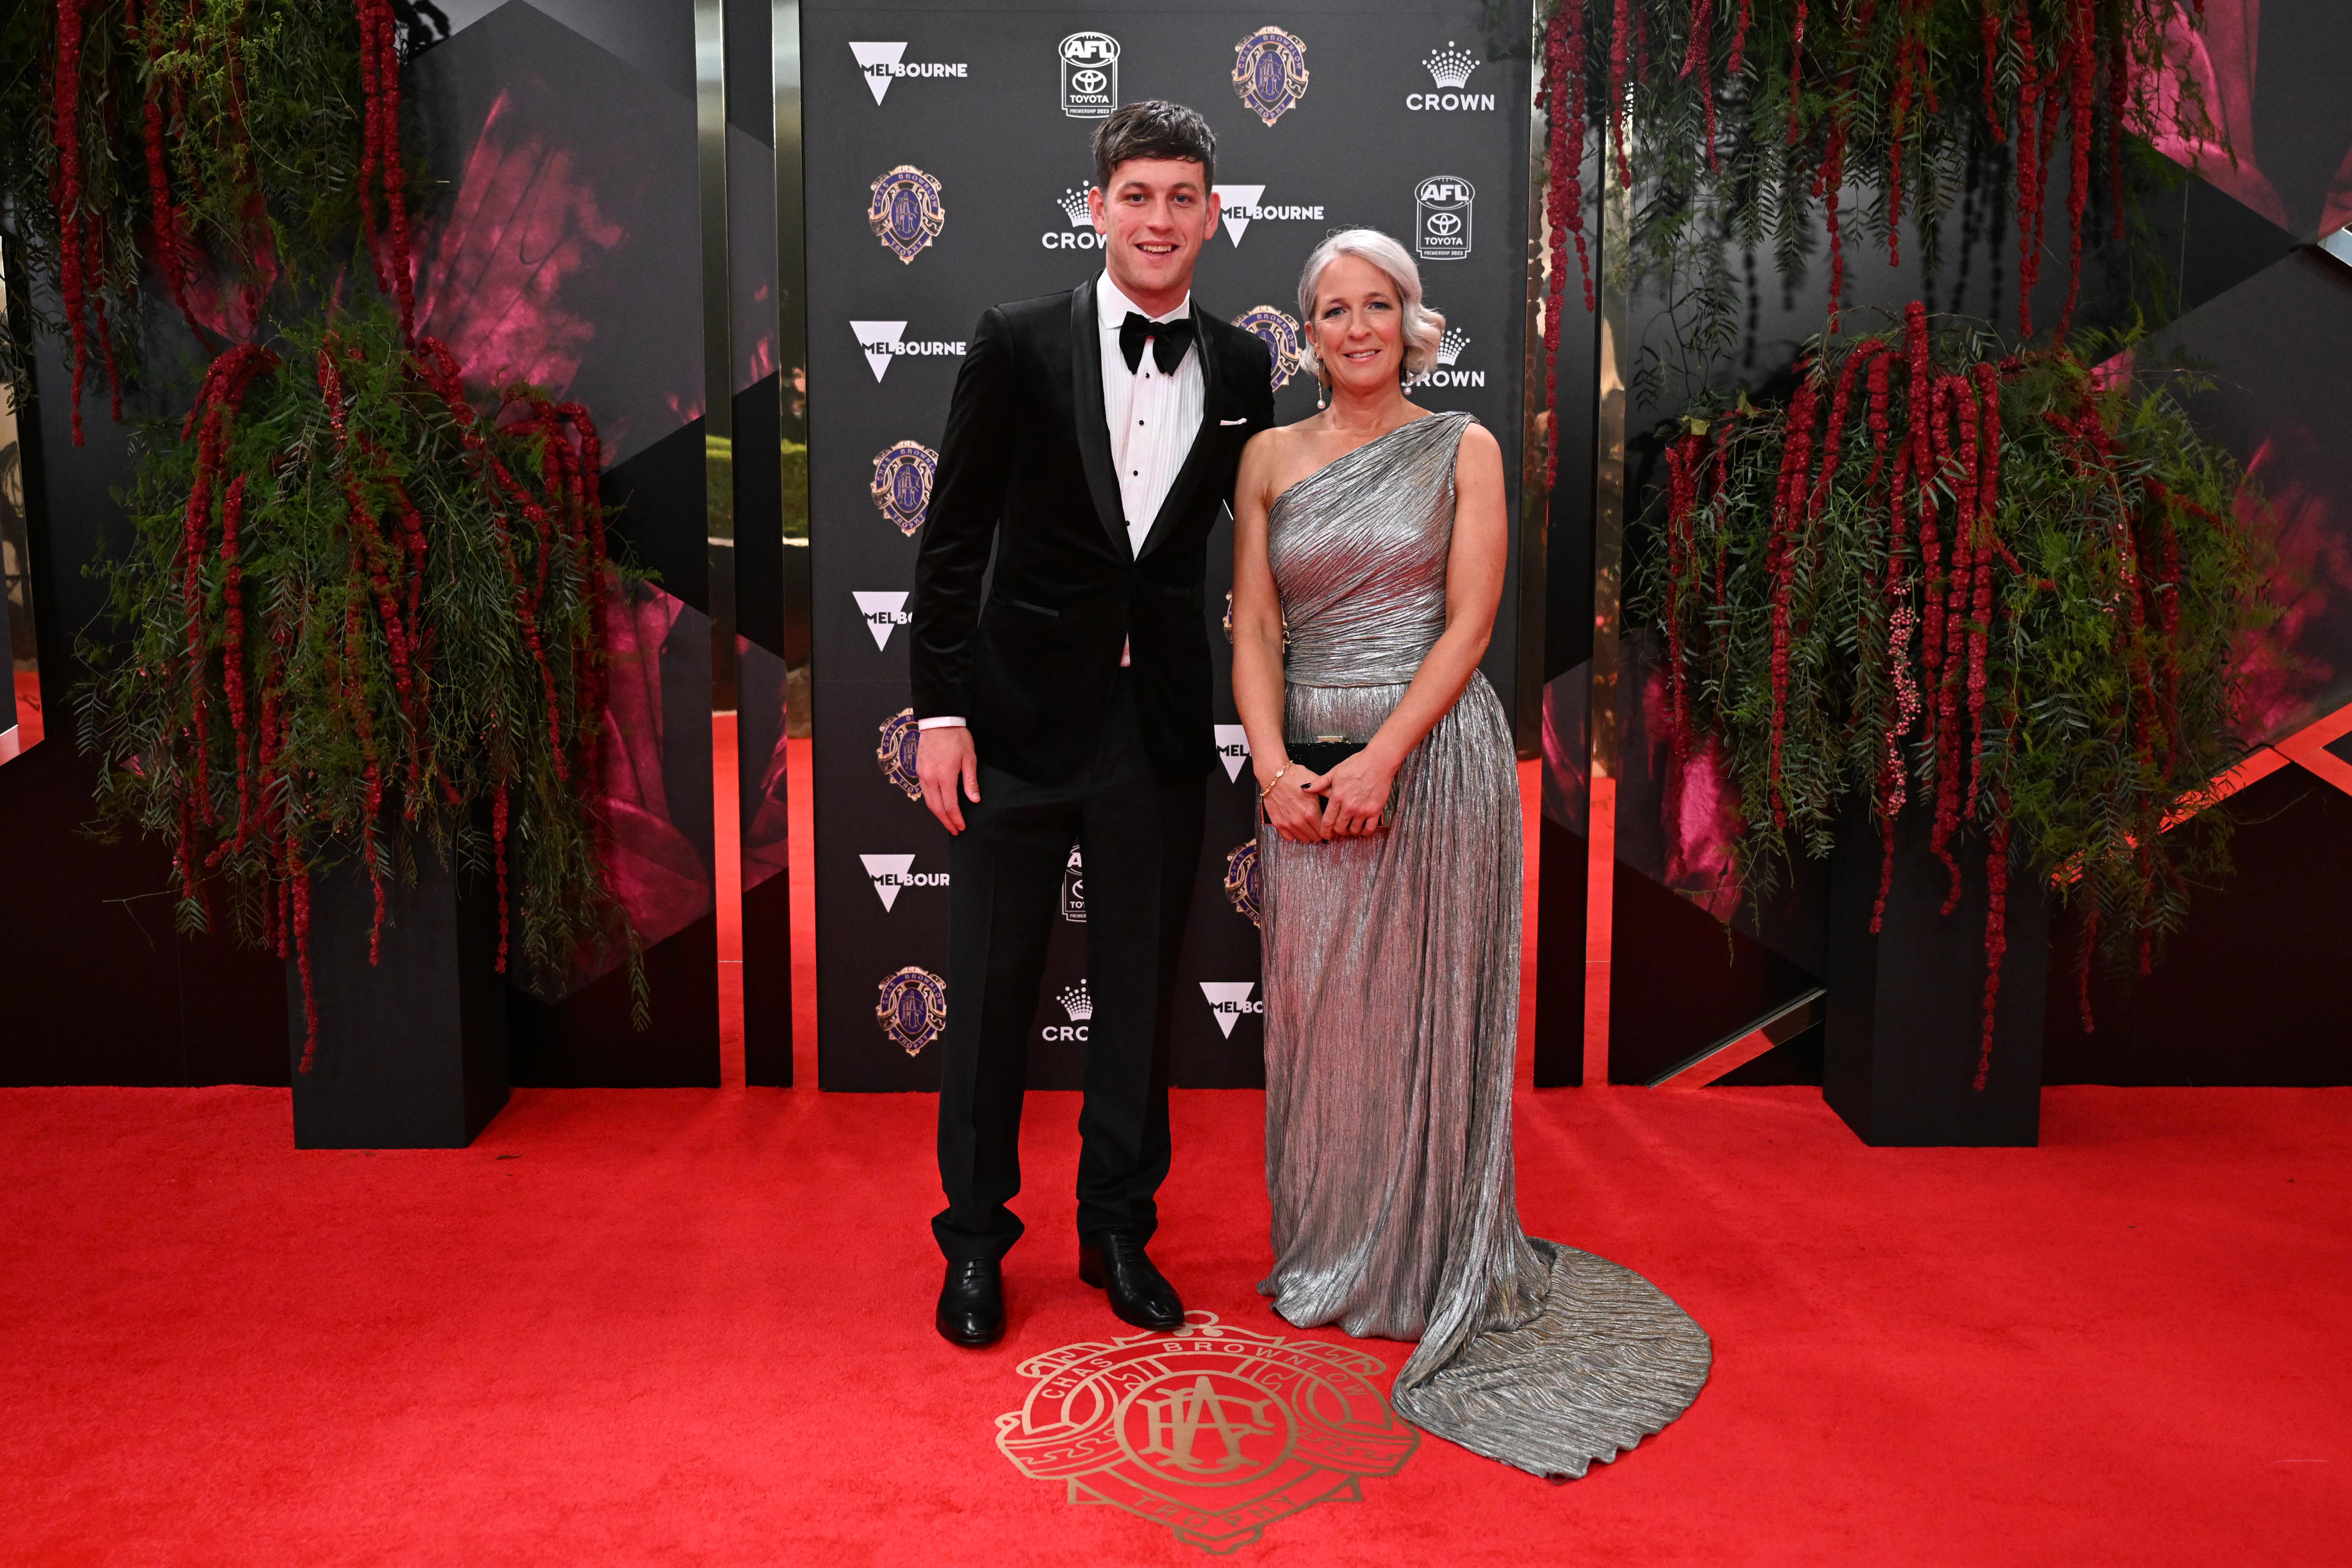 Port Adelaide midfielder Zak Butters brought his mum, Renee, along as his Brownlow date. 